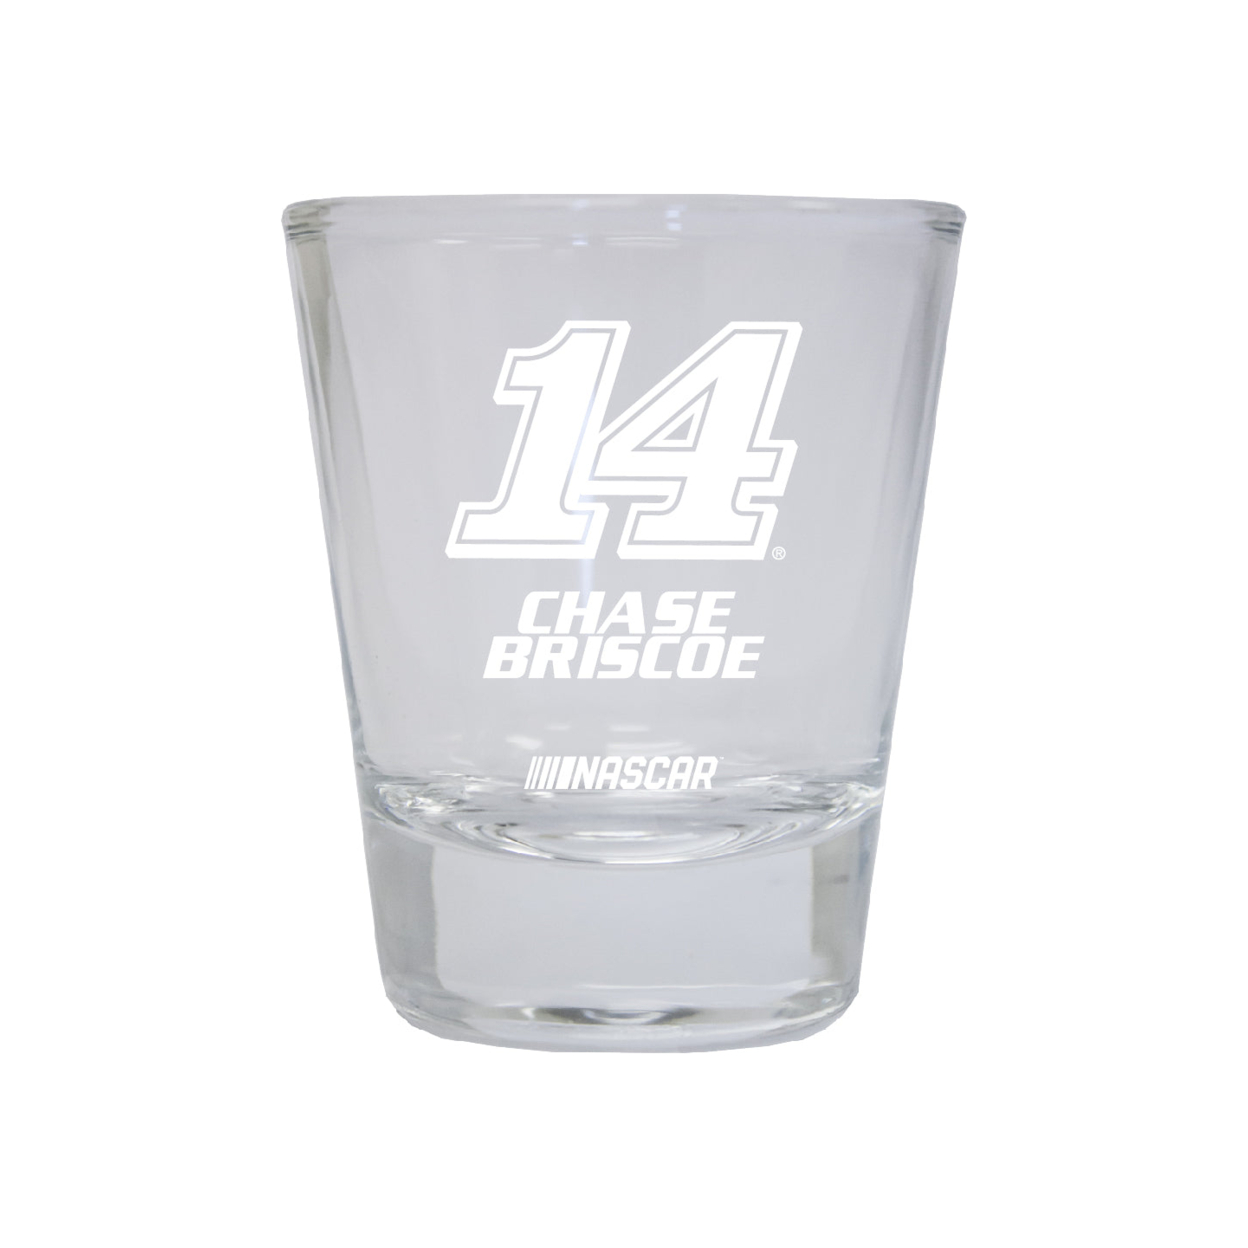 Chase Briscoe #14 Nascar Etched Round Shot Glass New For 2022